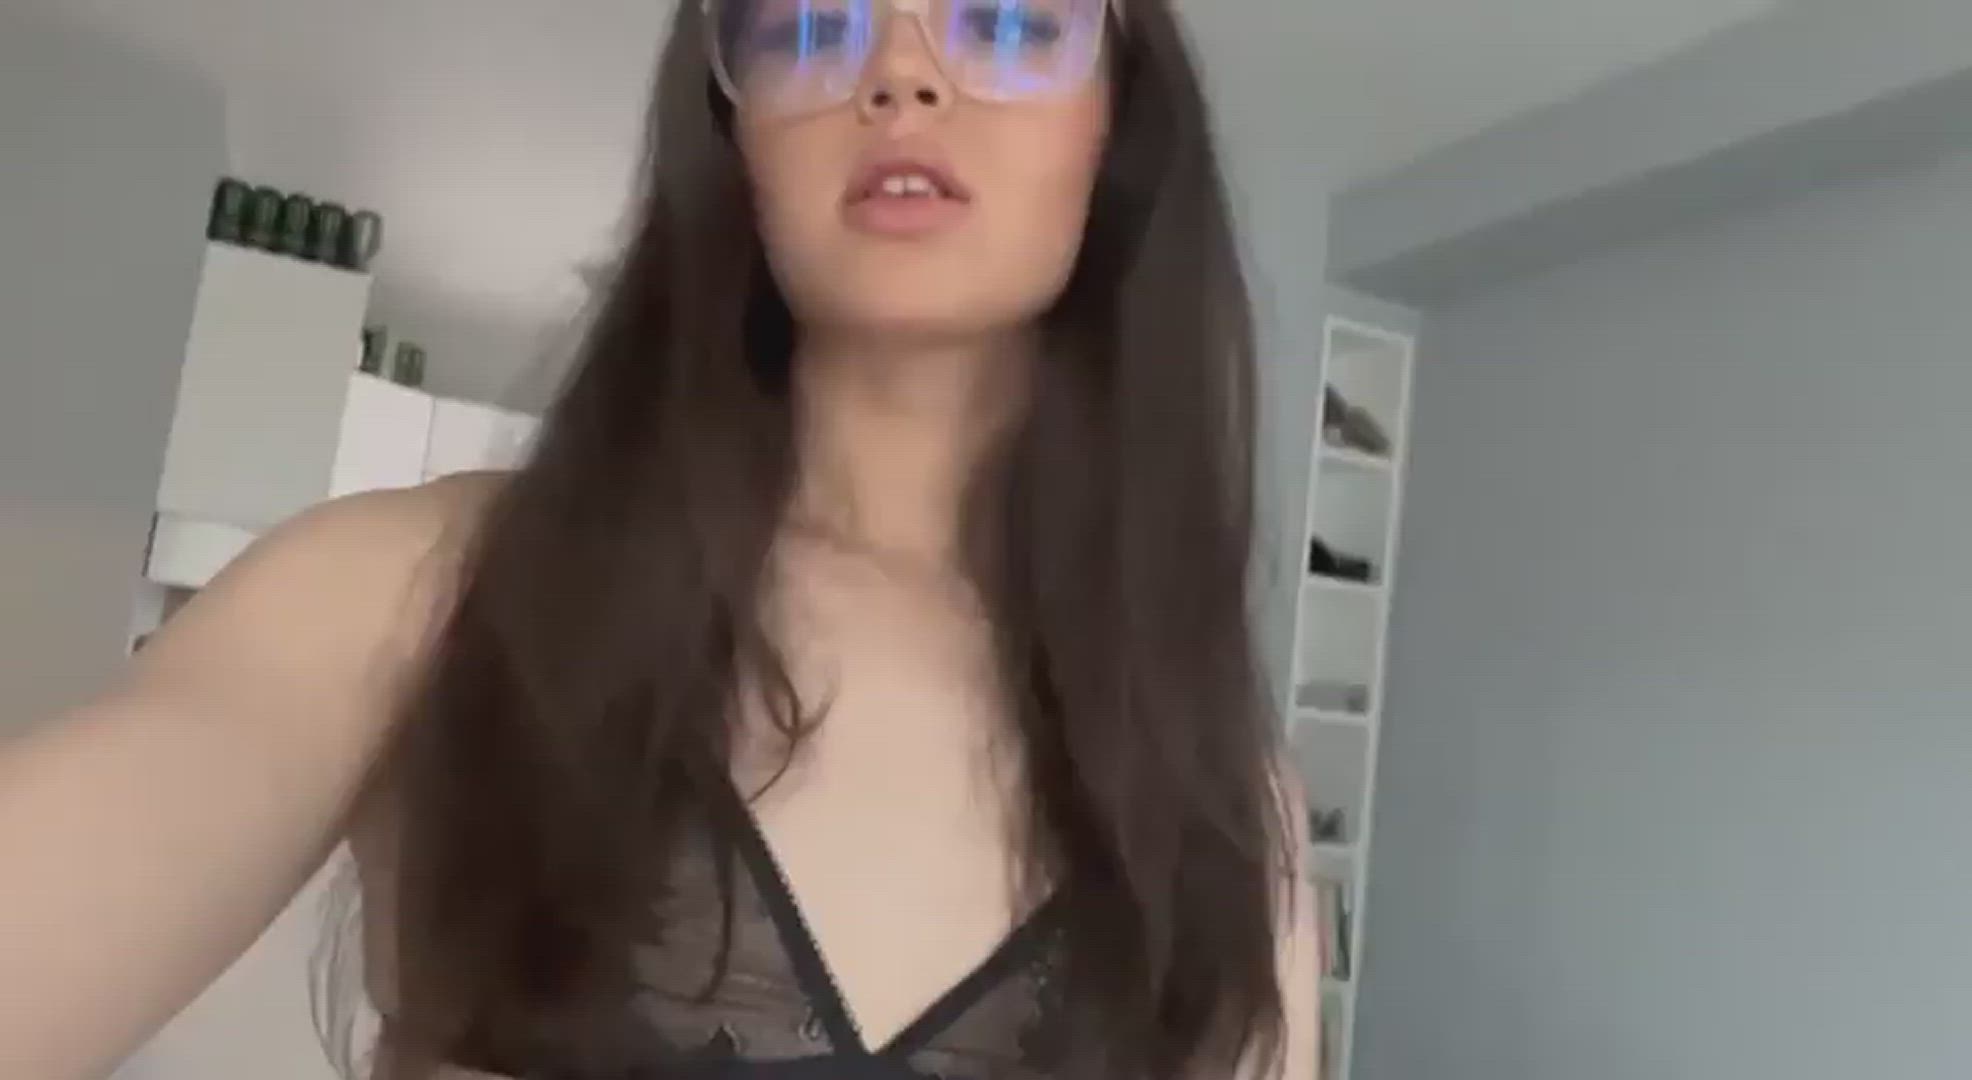 Amateur porn video with onlyfans model snowiislxt <strong>@snowiislxt</strong>